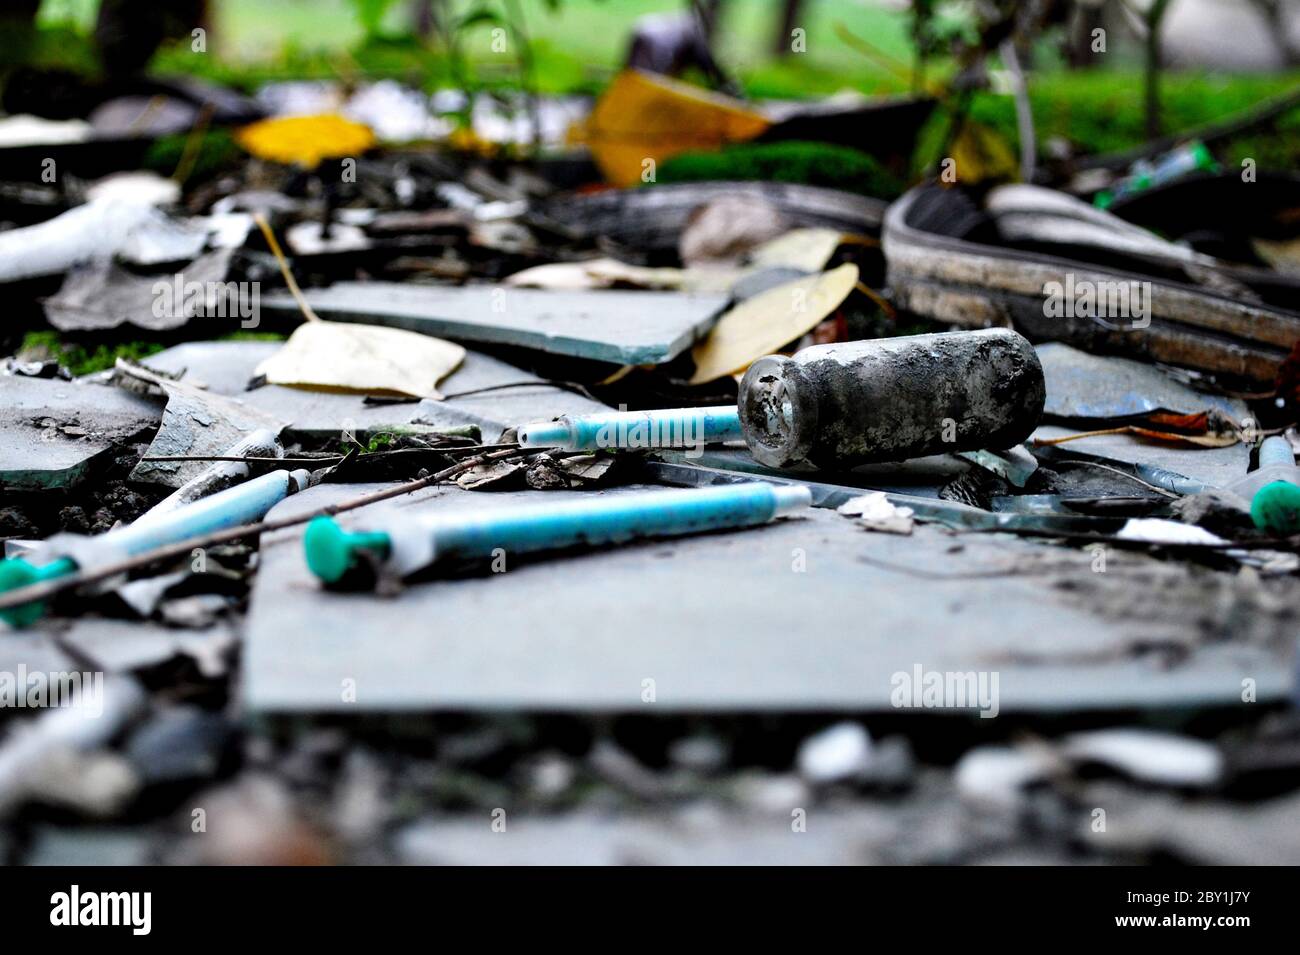 narcotic syringes in the junkyard Stock Photo